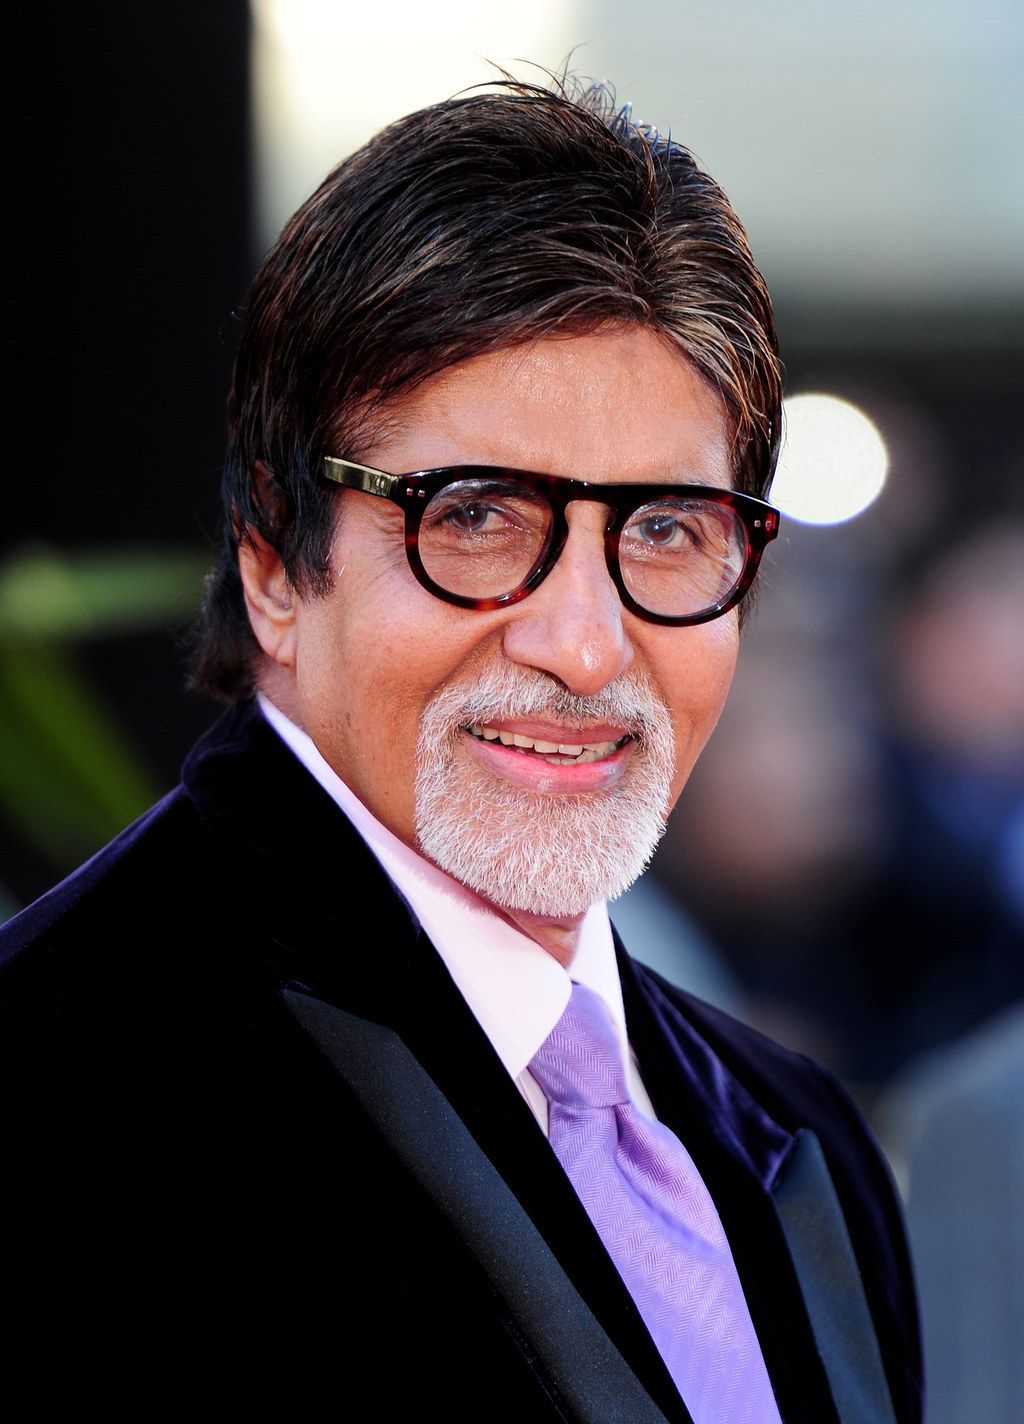 And Bollywood’s biggest name, Amitabh Bachchan, worked as a freight